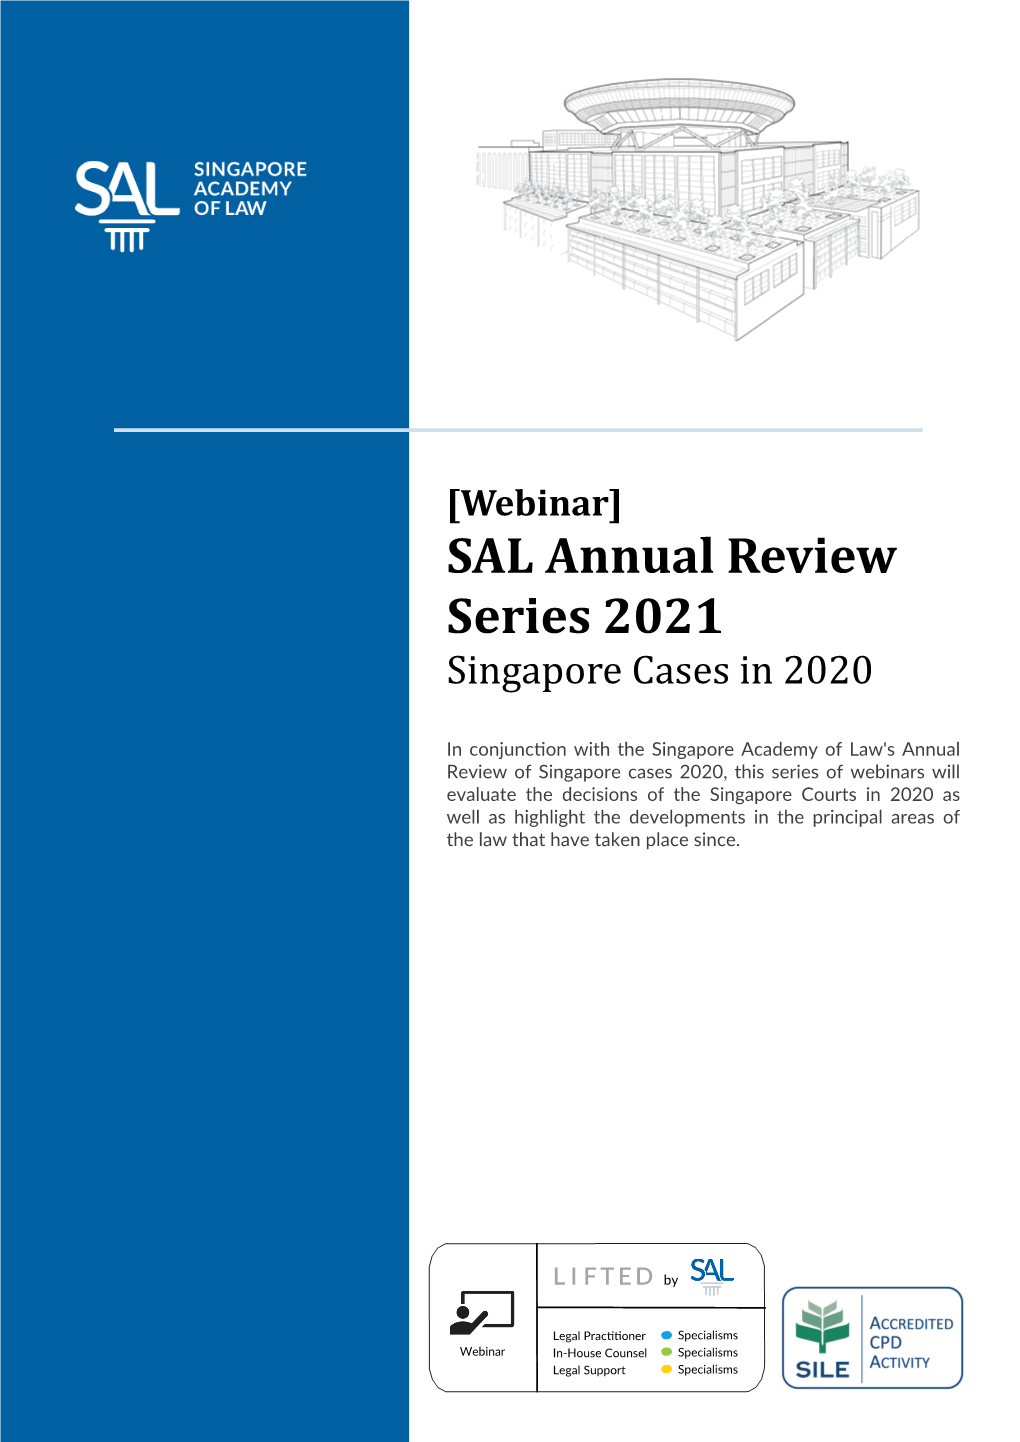 [Webinar] SAL Annual Review Series 2021 Singapore Cases in 2020